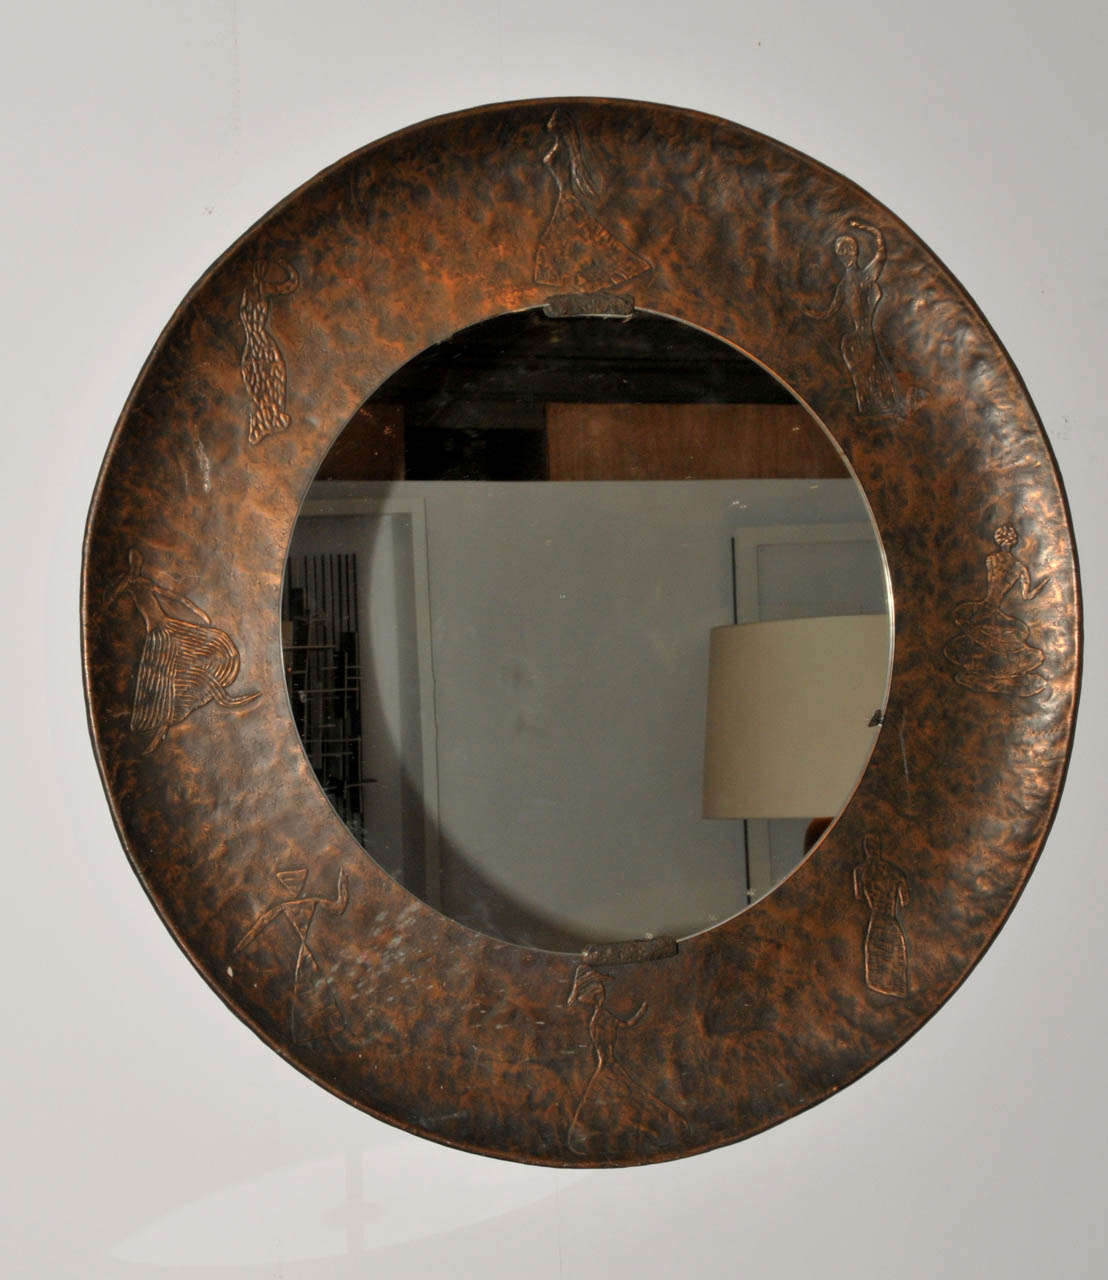 1970's copper mirror by Burchiellaro. One impact on the mirror edge. Normal wear consistent with age and use.